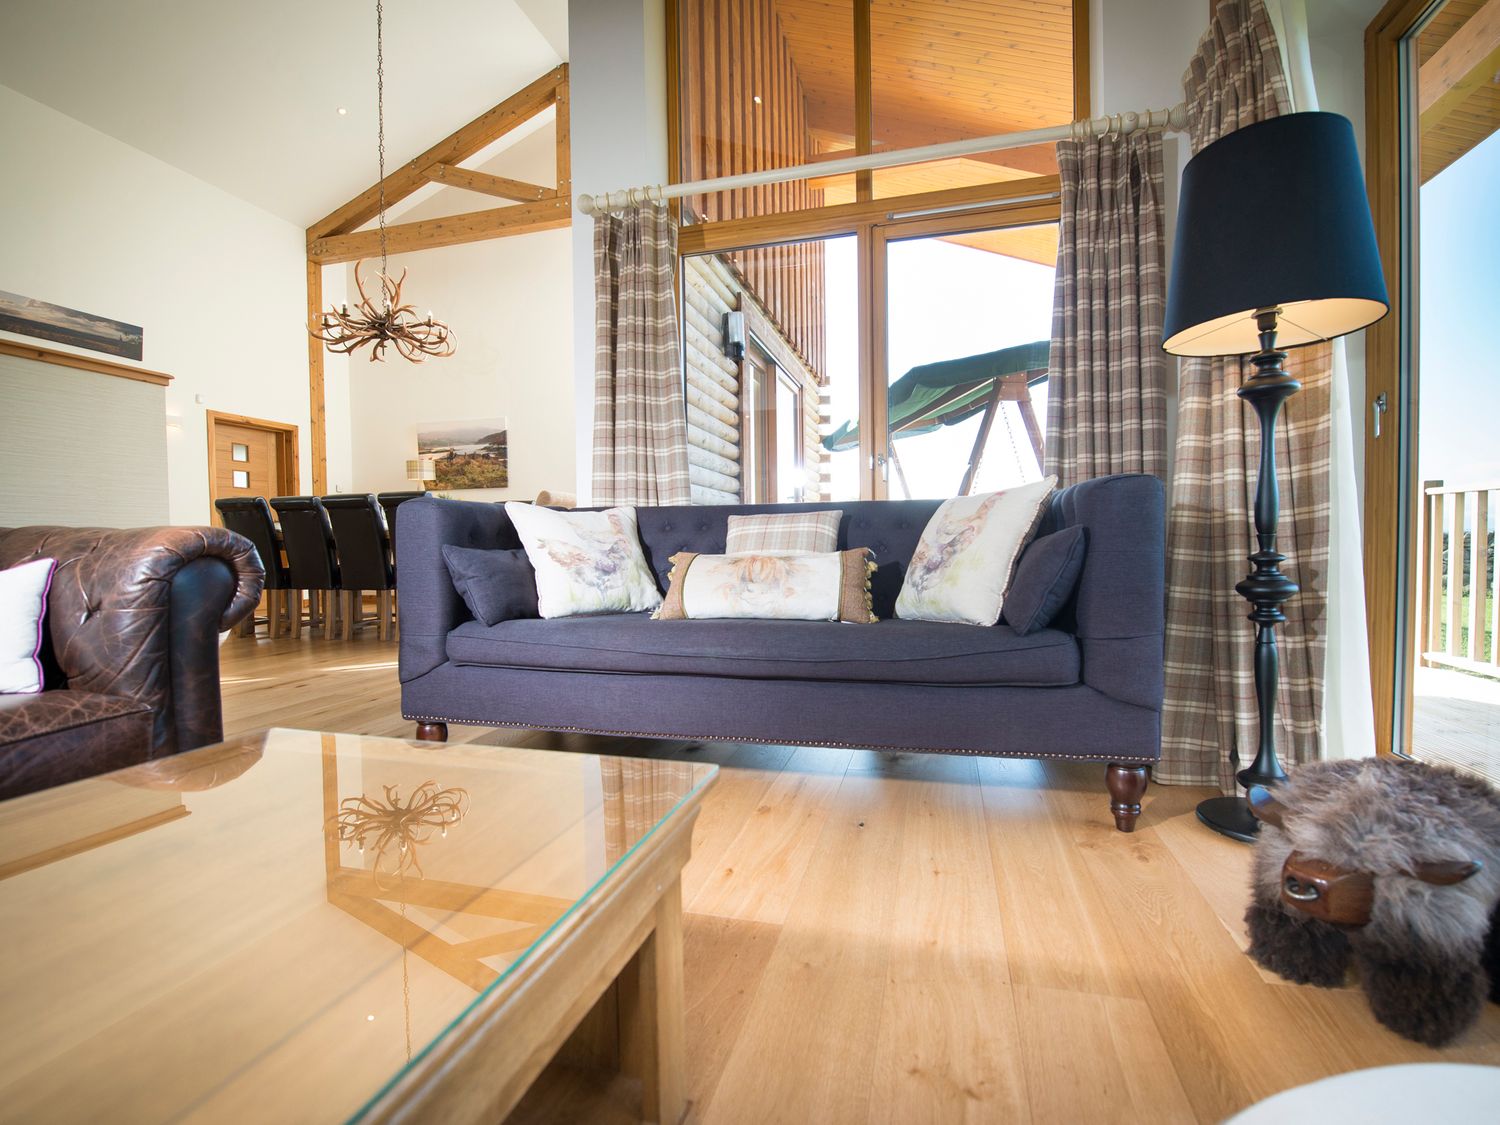 Aurae is in Cawdor, Highlands. Four-bedroom, luxury log cabin with hot tub and sauna. Rural. Family.